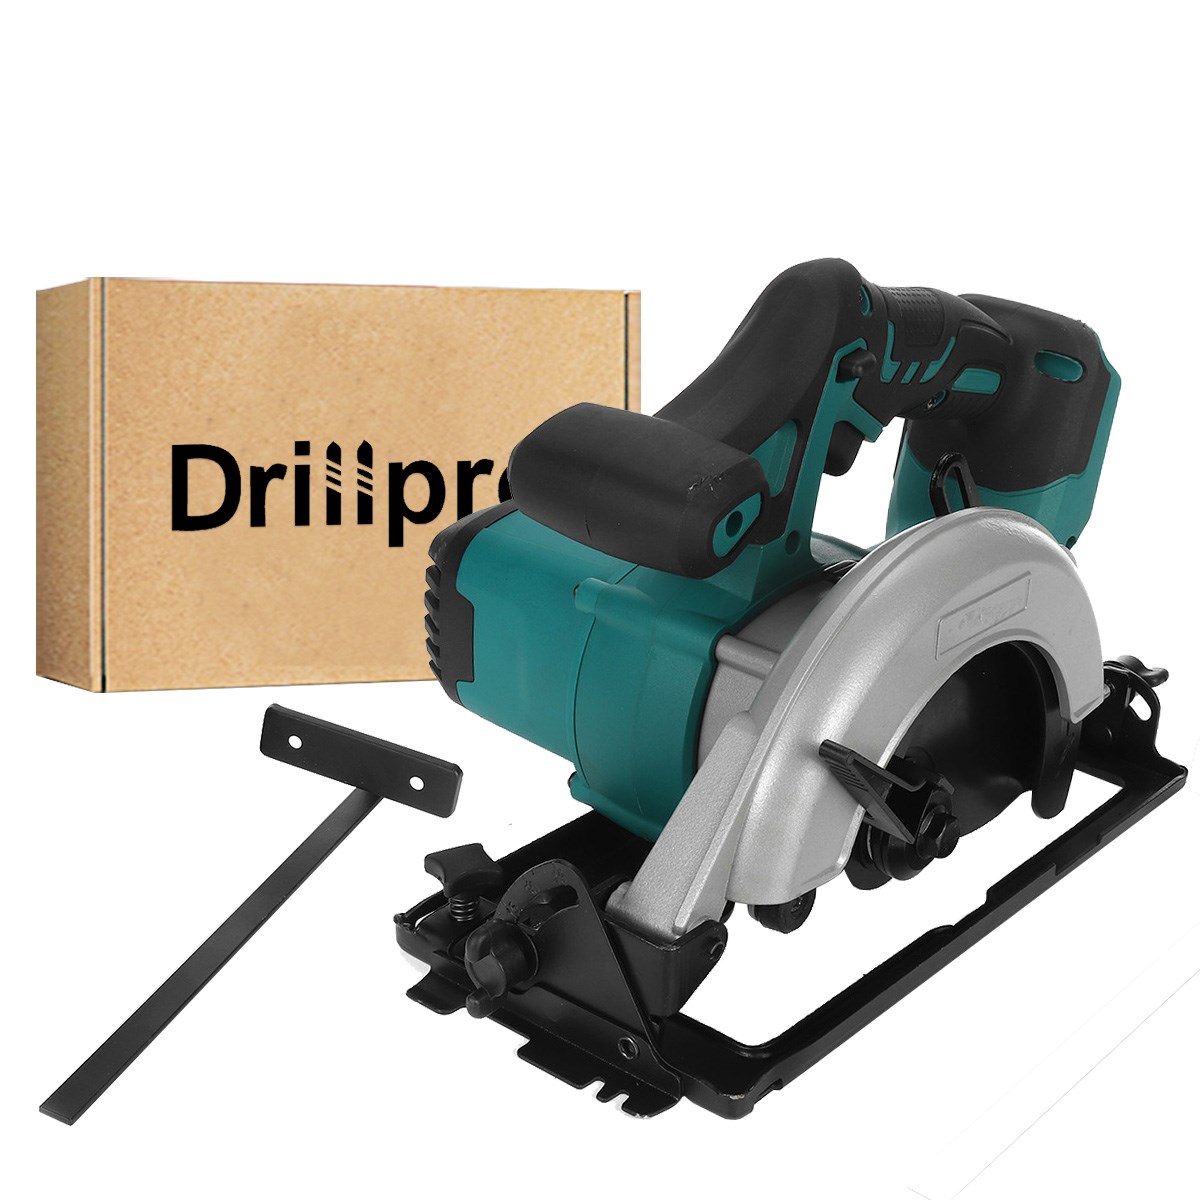 Drillpro-Electric-Circular-Saw-6Inch152mm-Power-Tools-3800RPM-Multifunction-Cutting-Machine-For-Maki-1744309-11